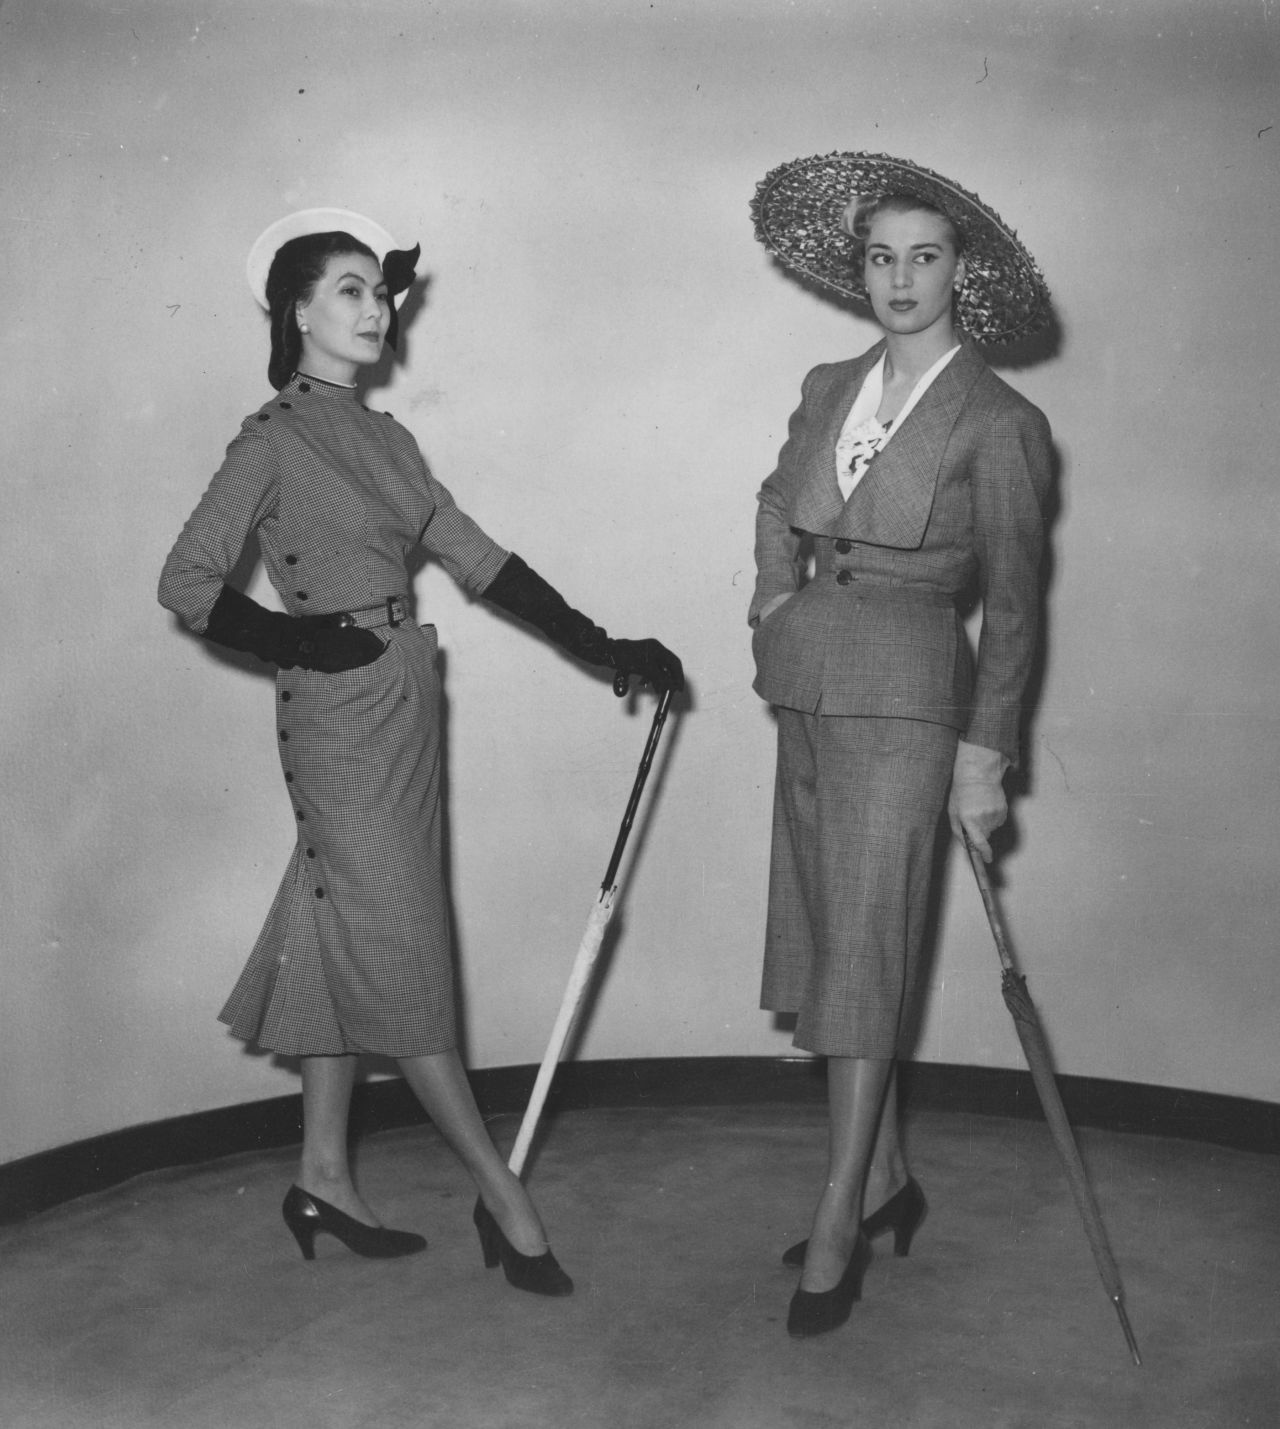 "His February 1947 collection's signature rebelled against wartime uniforms, austerity and fabric restrictions — the waist was cinched, calves were shown and busts were celebrated," says Gaultier. (Pictured: Models wear Christian Dior designs at London's Savoy Hotel, 1950)